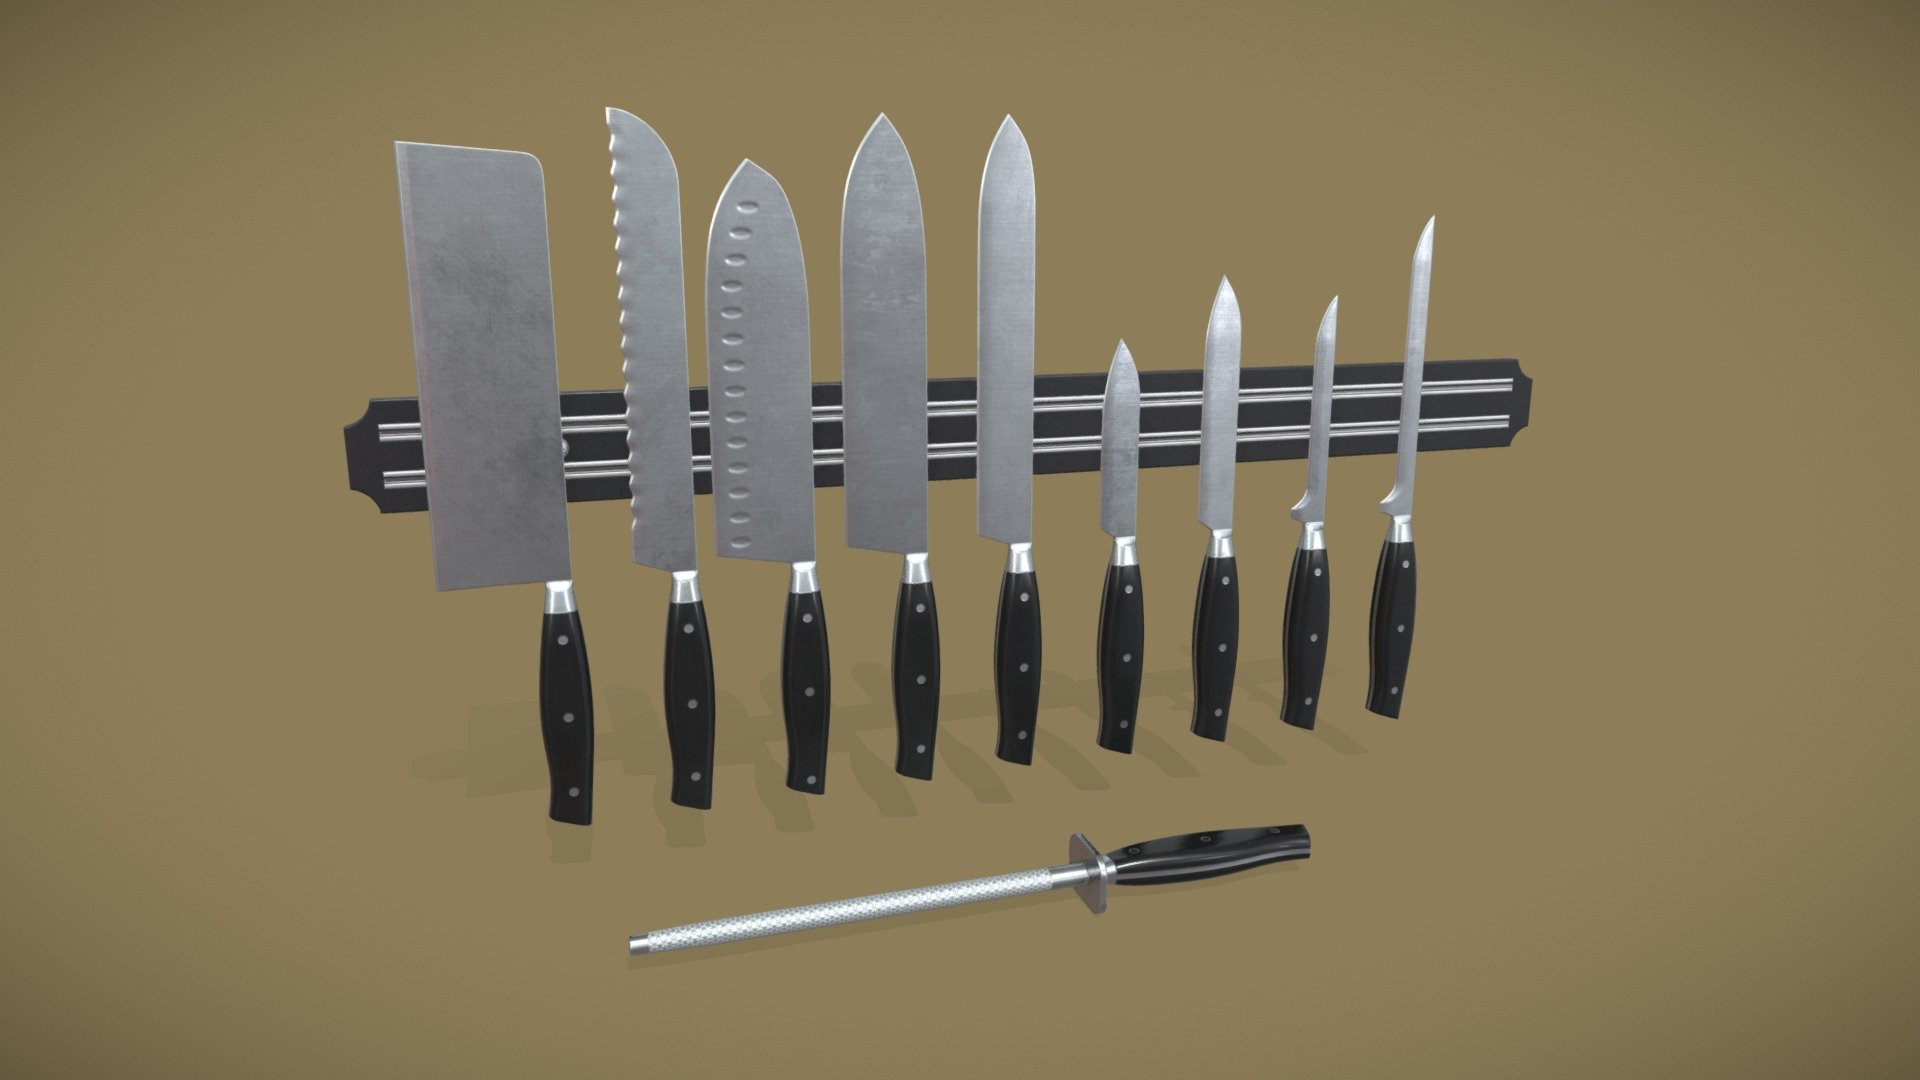 Game ready low-poly models from kitchen knife set with PBR textures for game engines/renderers.

This product is intended for game/real time/background use. This model is not intended for subdivision. Geometry is triangulated. Model unwrapped manually. All materials and objects named appropriately. Scaled to approximate real world size. Tested in Marmoset Toolbag 3. Tested in Unreal Engine 4. Tested in Unity. No special plugins needed. .obj and .fbx versions exported from Blender 2.83.

4096x4096 textures in png format:
- General PBR Metallic/Roughness  textures: BaseColor, Metallic, Roughness, Normal, AO;
- Unity Textures: Albedo, MetallicSmoothness, Normal, AO;
- Unreal Engine 4 textures: BaseColor, OcclusionRoughnessMetallic, Normal;
- PBR Specular/Glossiness textures: Diffuse, Specular, Glossiness, Normal, AO 3d model